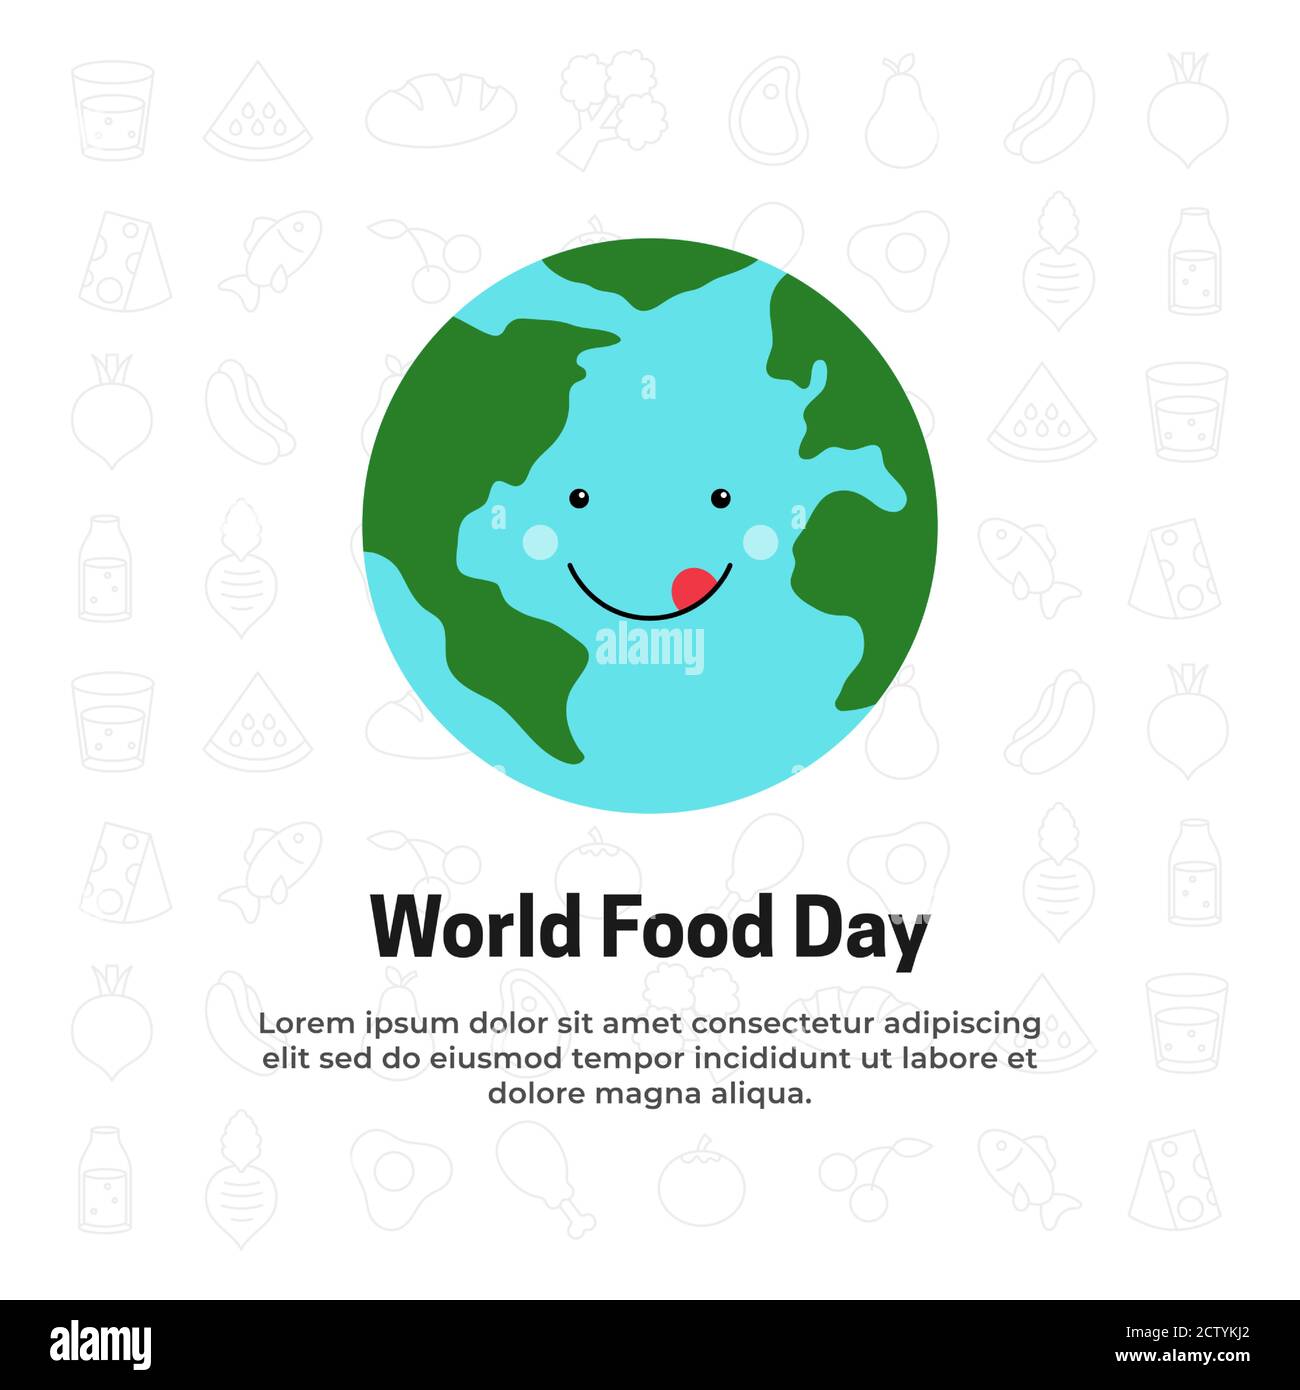 Funny cute earth cartoon face with delicious yummy smile vector illustration for World Food Day celebration poster background concept design Stock Vector